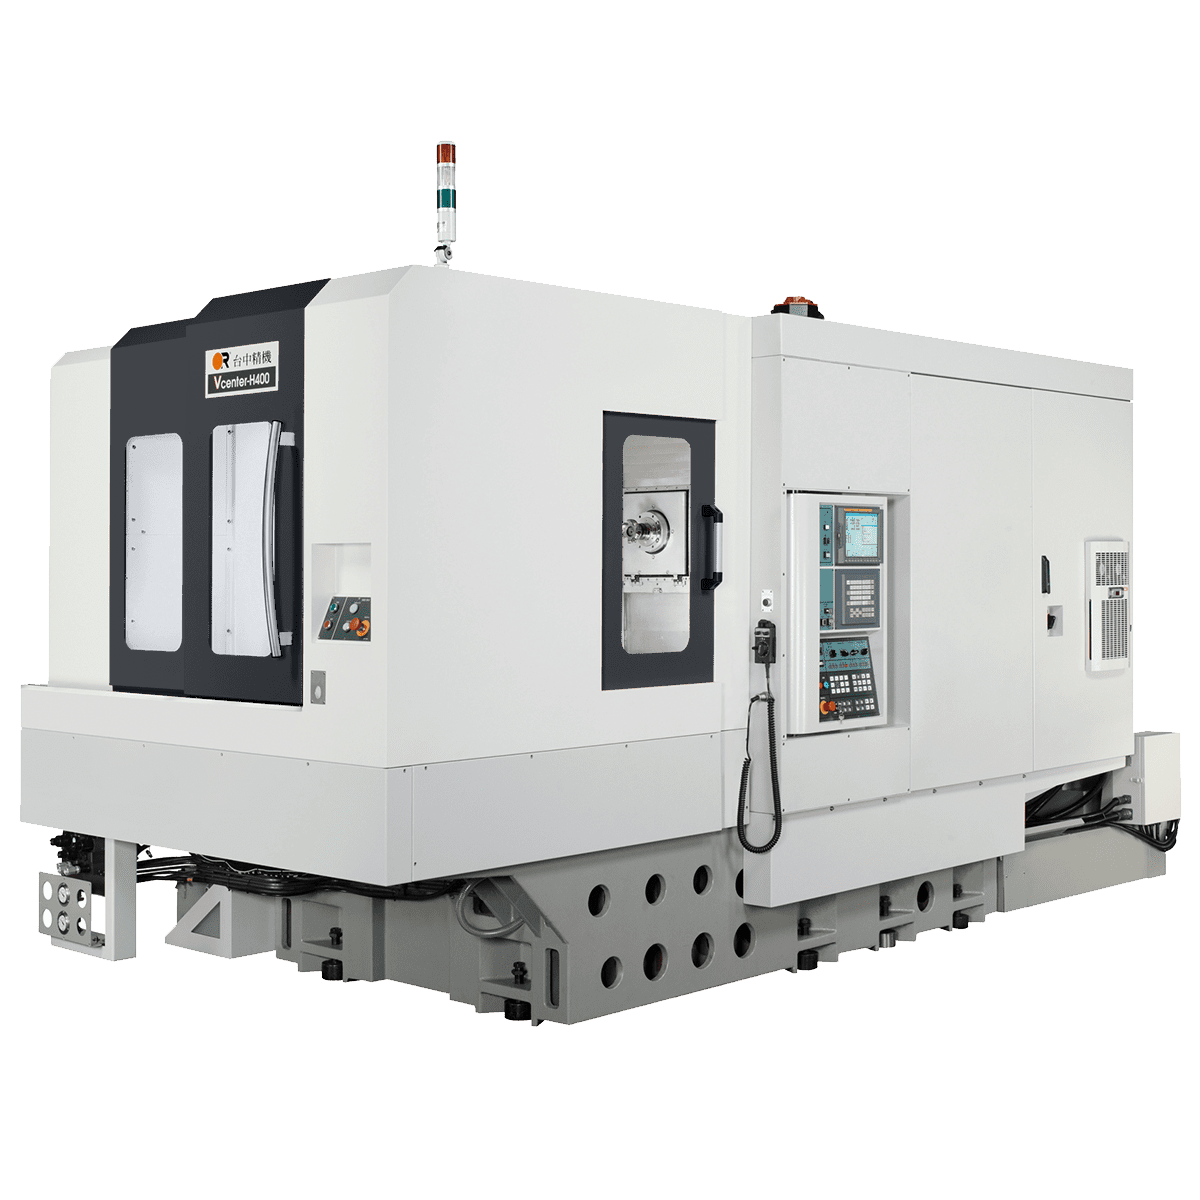 Vcenter H400 GM CNC LTD Suppliers of New CNC Machine Tools and